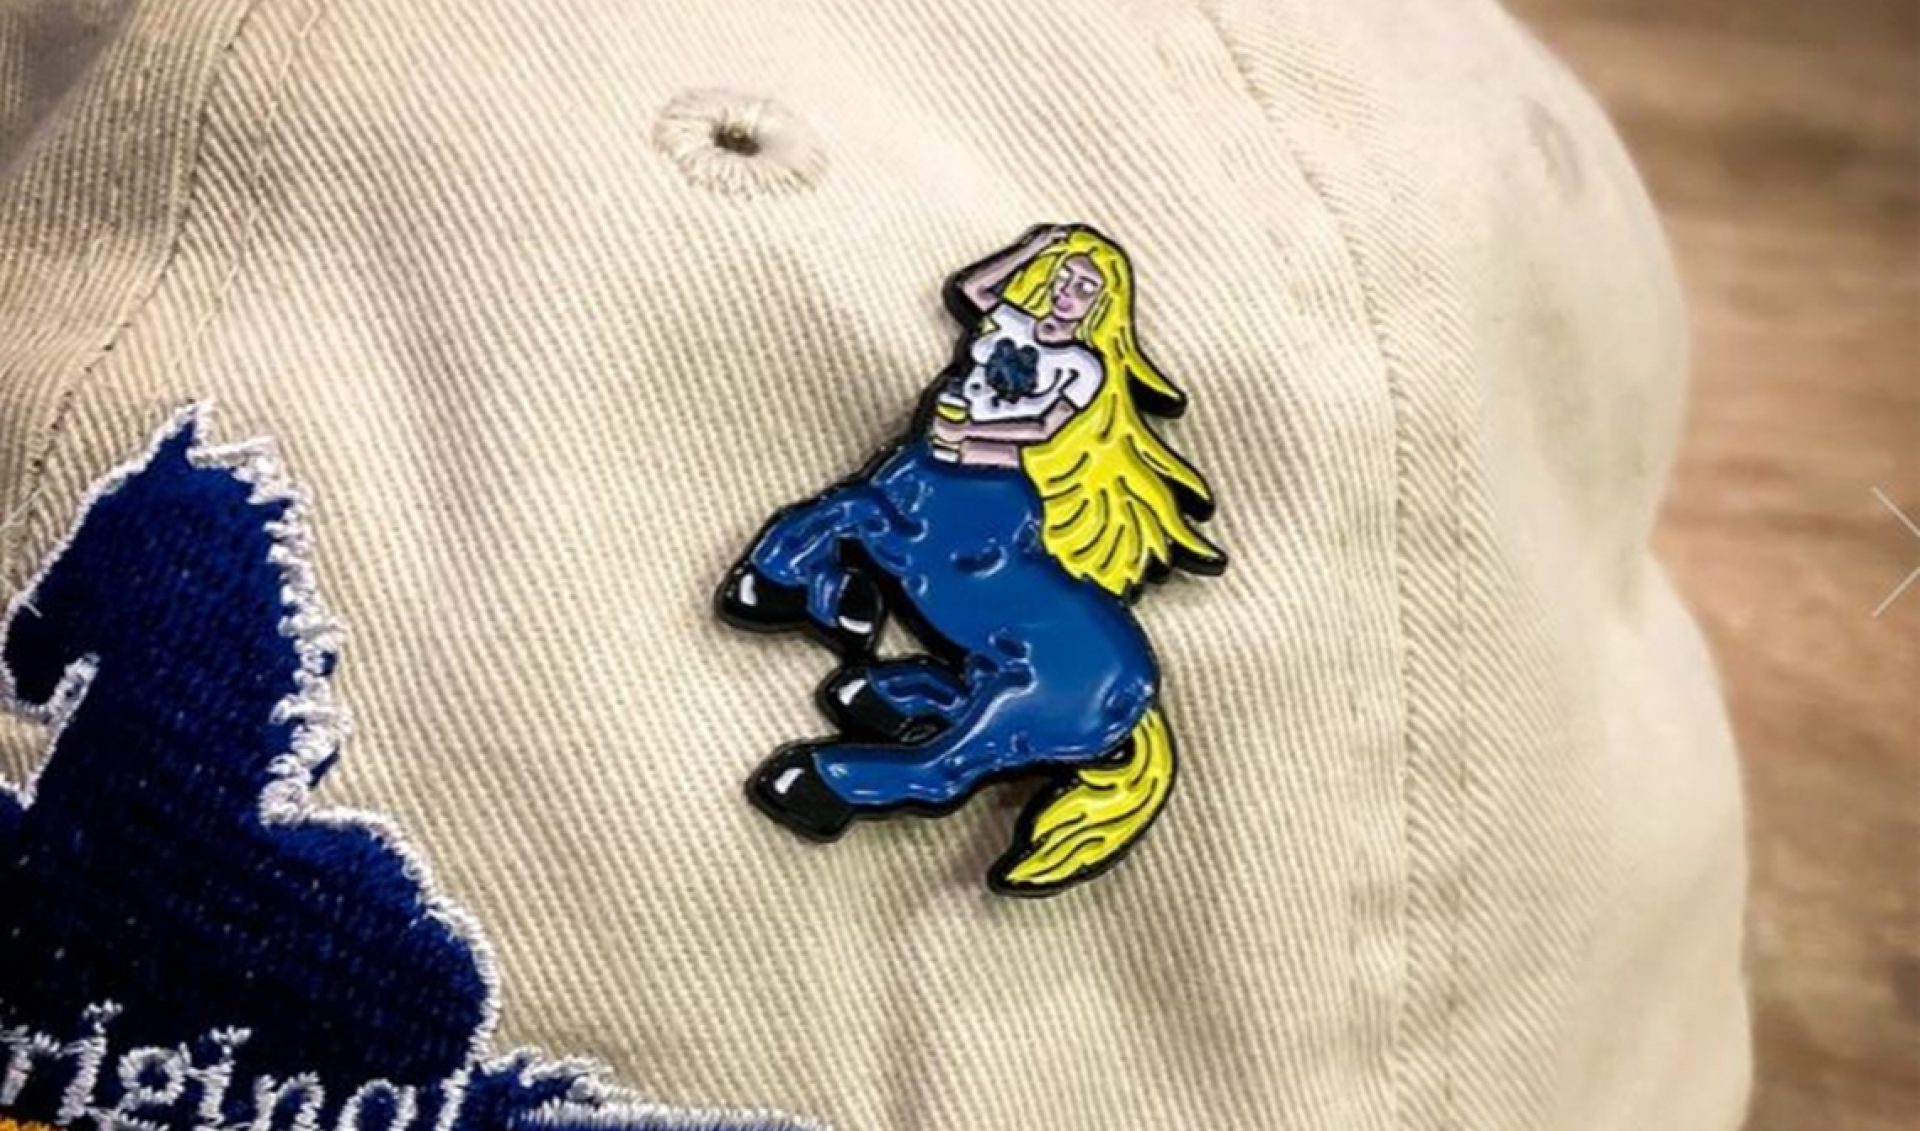 Graveyard Girl Is Vending Collectible Pins To Benefit Horse Therapy Nonprofit ‘Equi-librium’